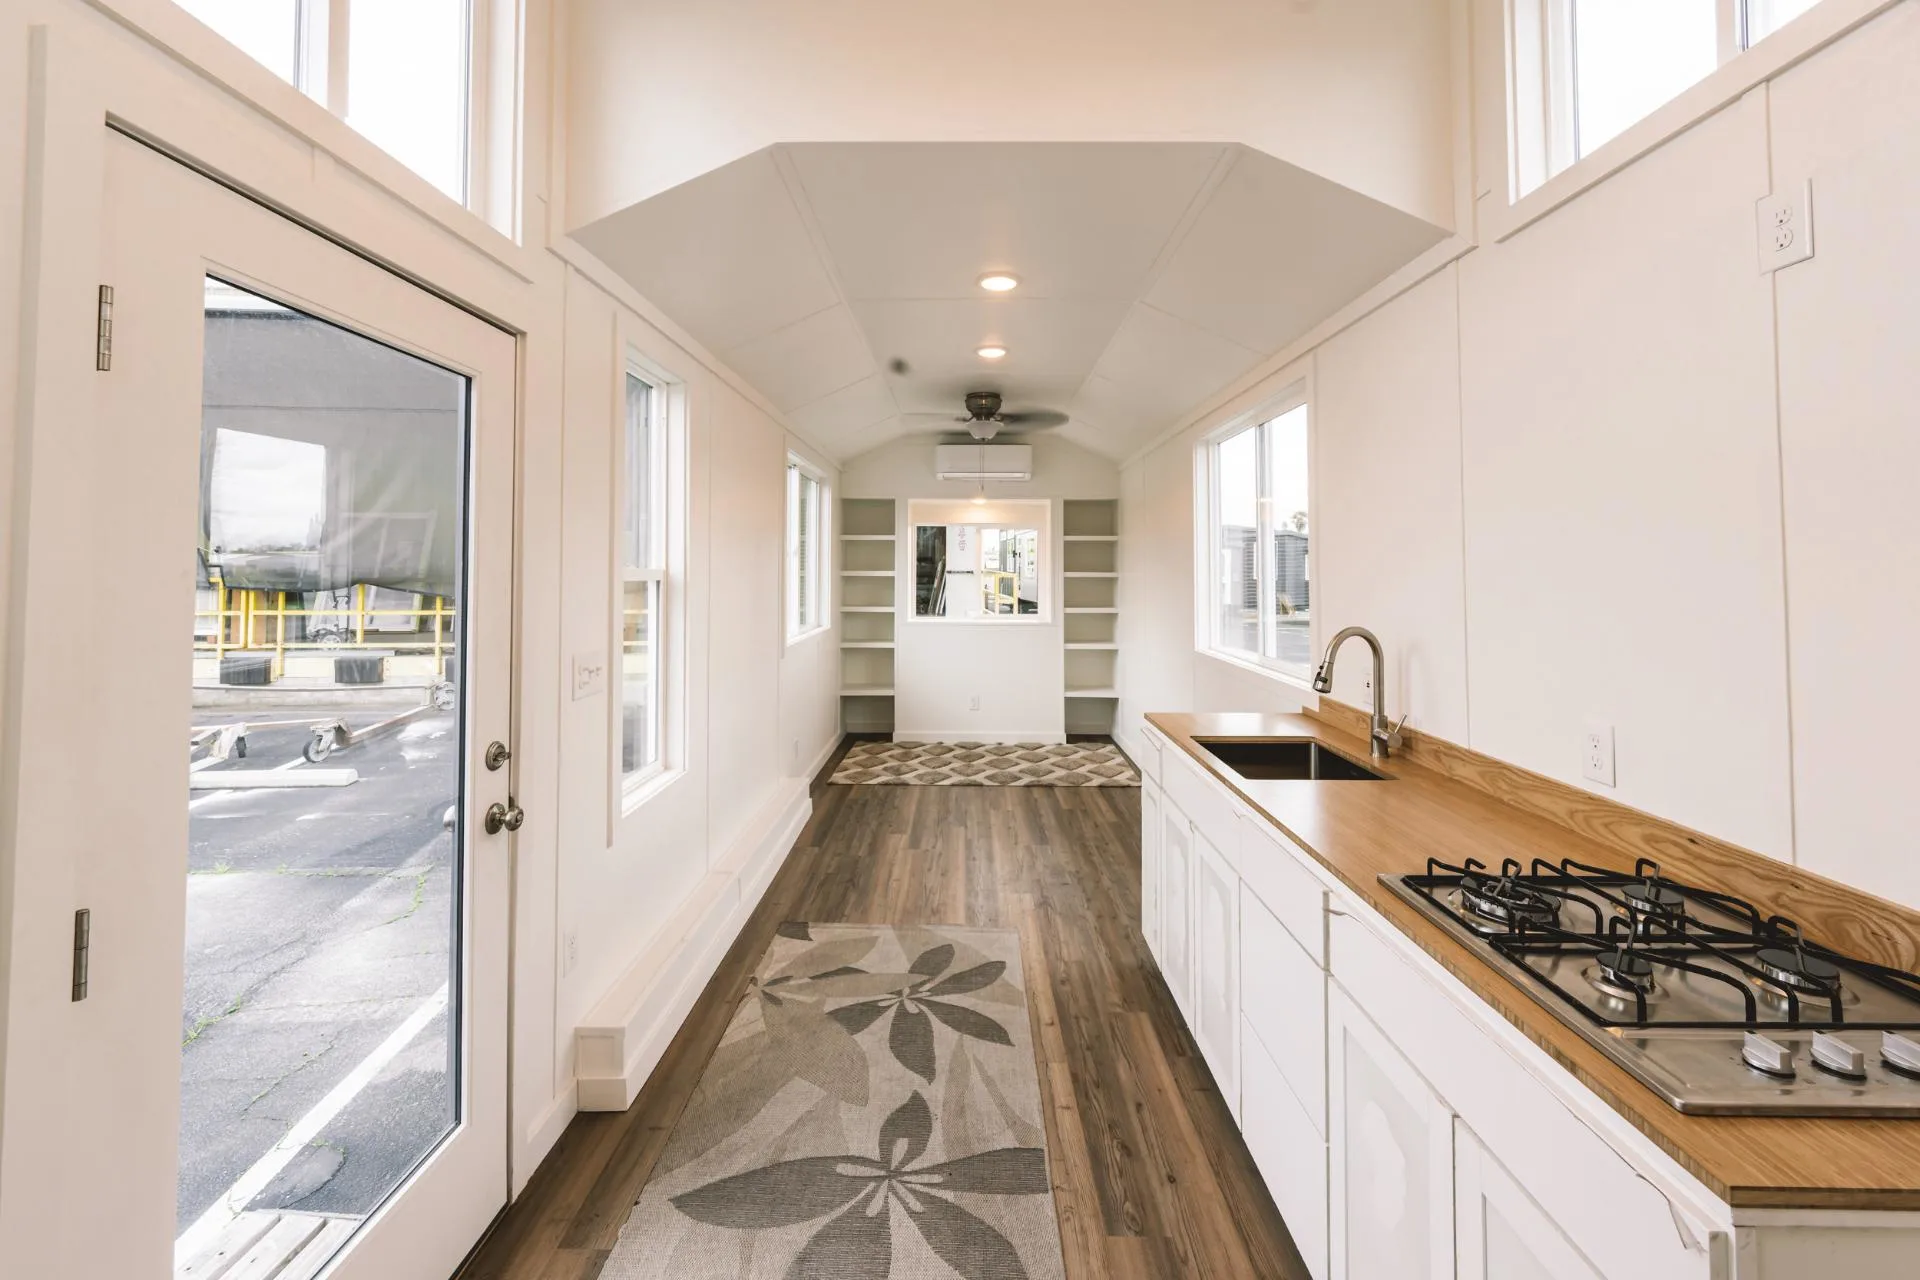 View of Kitchen and Living Area From Entryway - Gallery 30 by California Tiny House